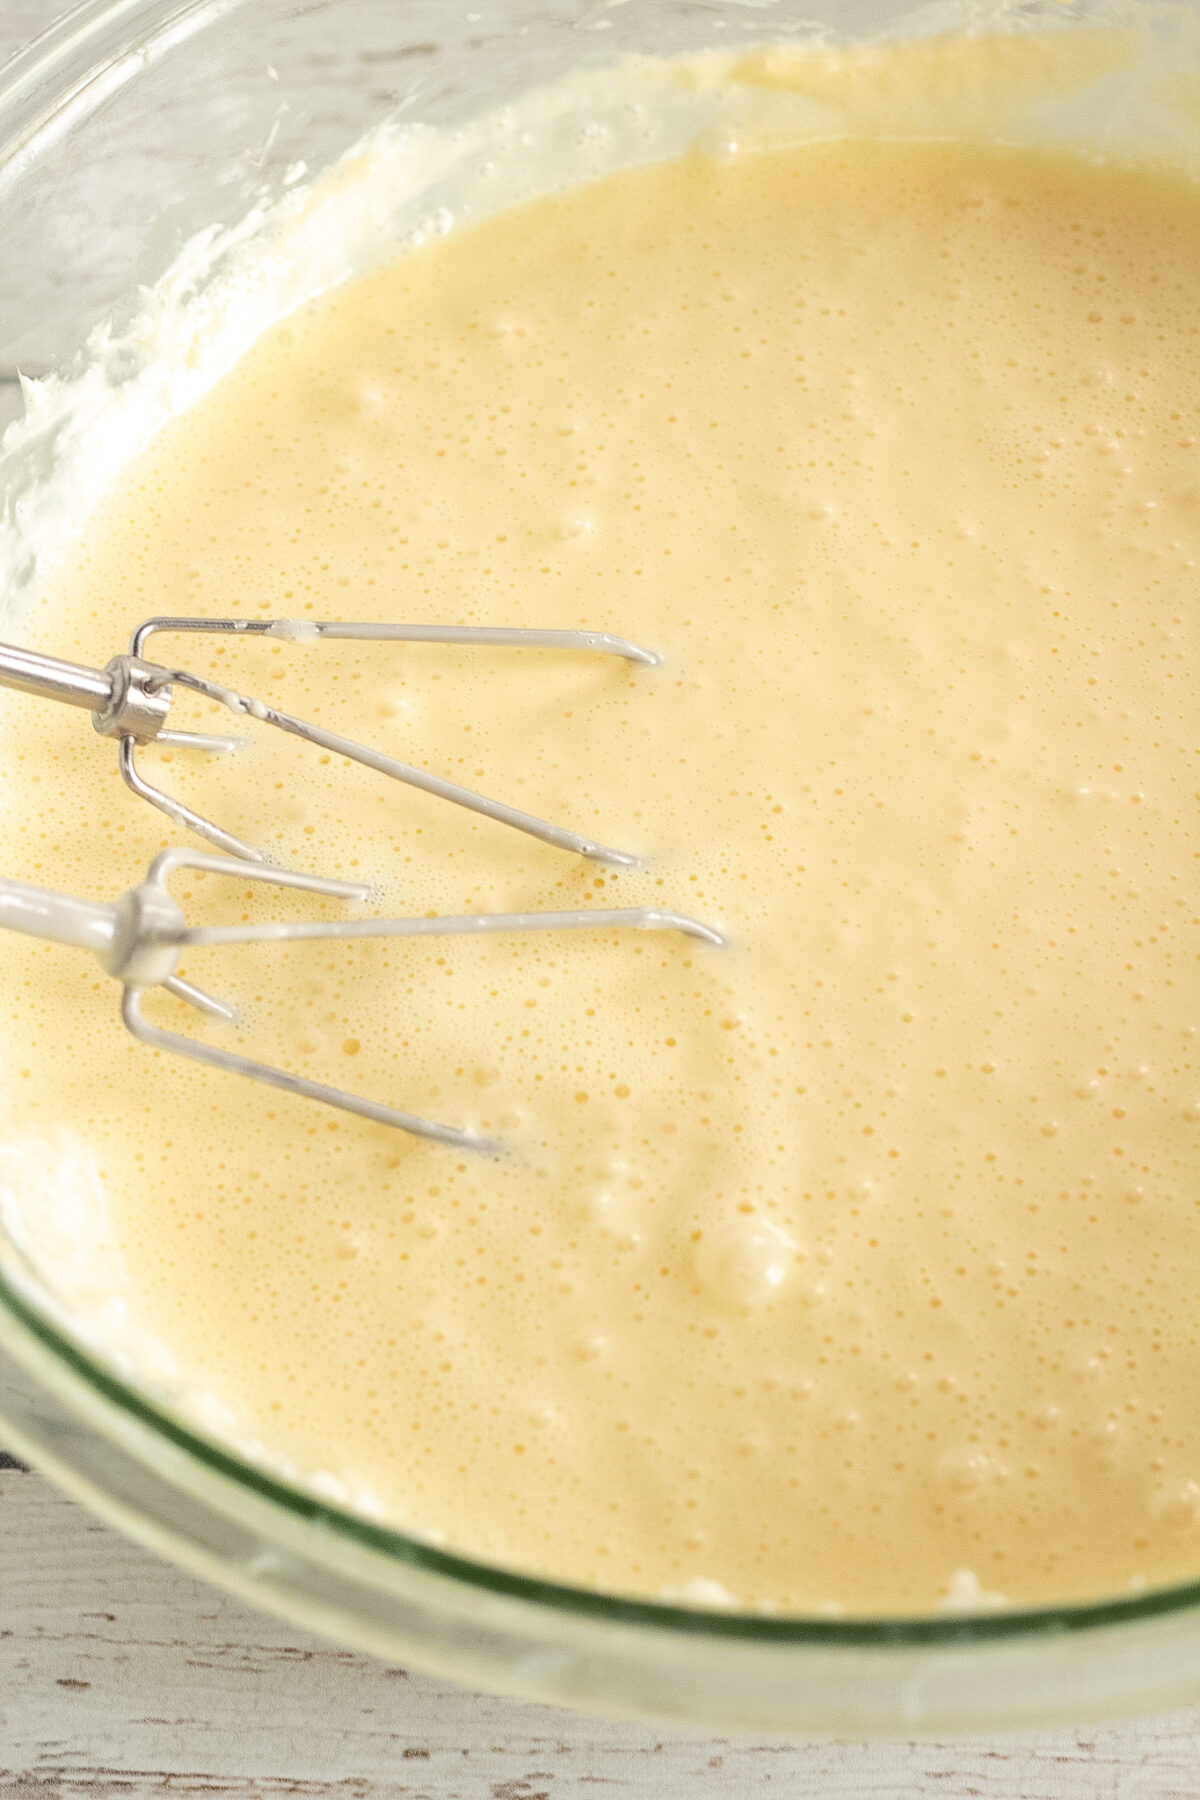 Cream cheese mixture fully combined.